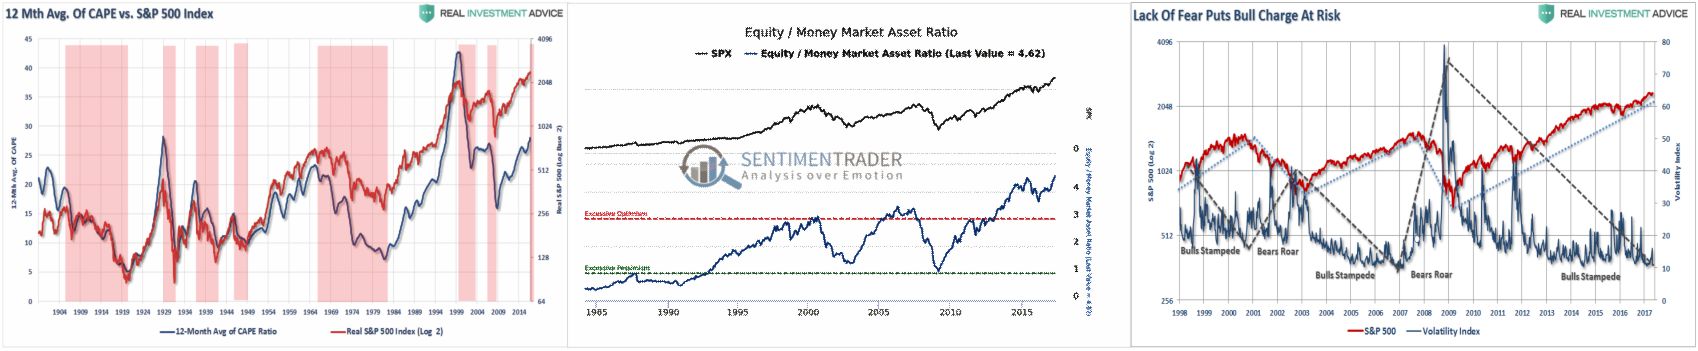 Valuations, Equity Allocation and Negative Free Cash Balances